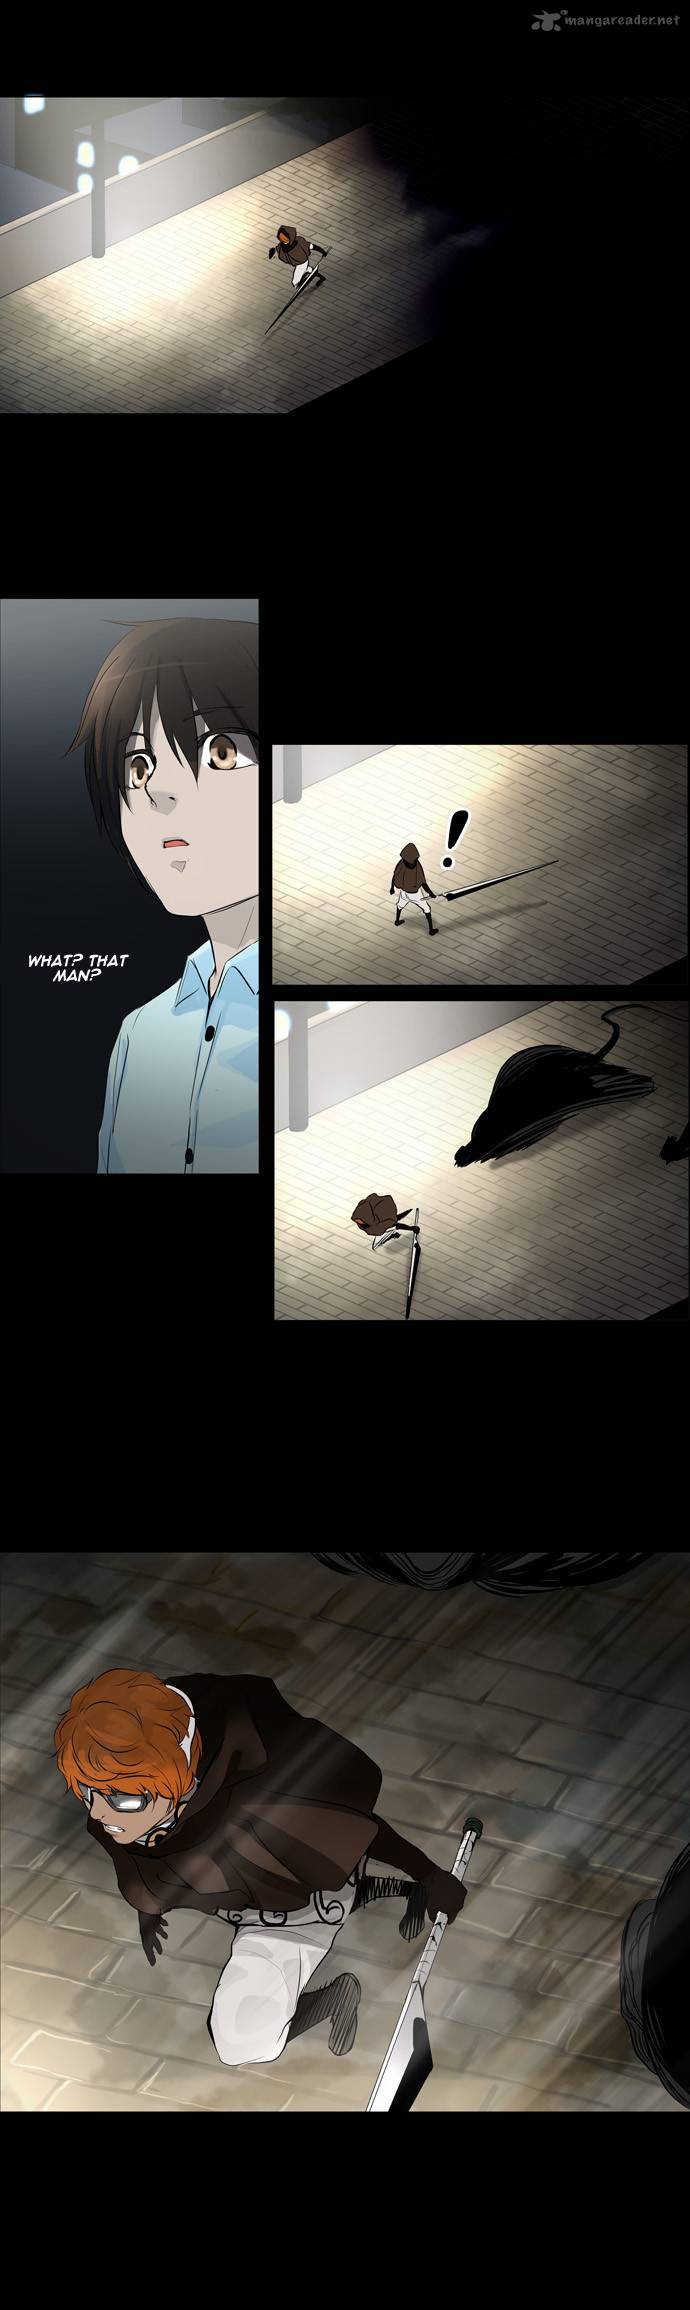 Tower Of God 137 2